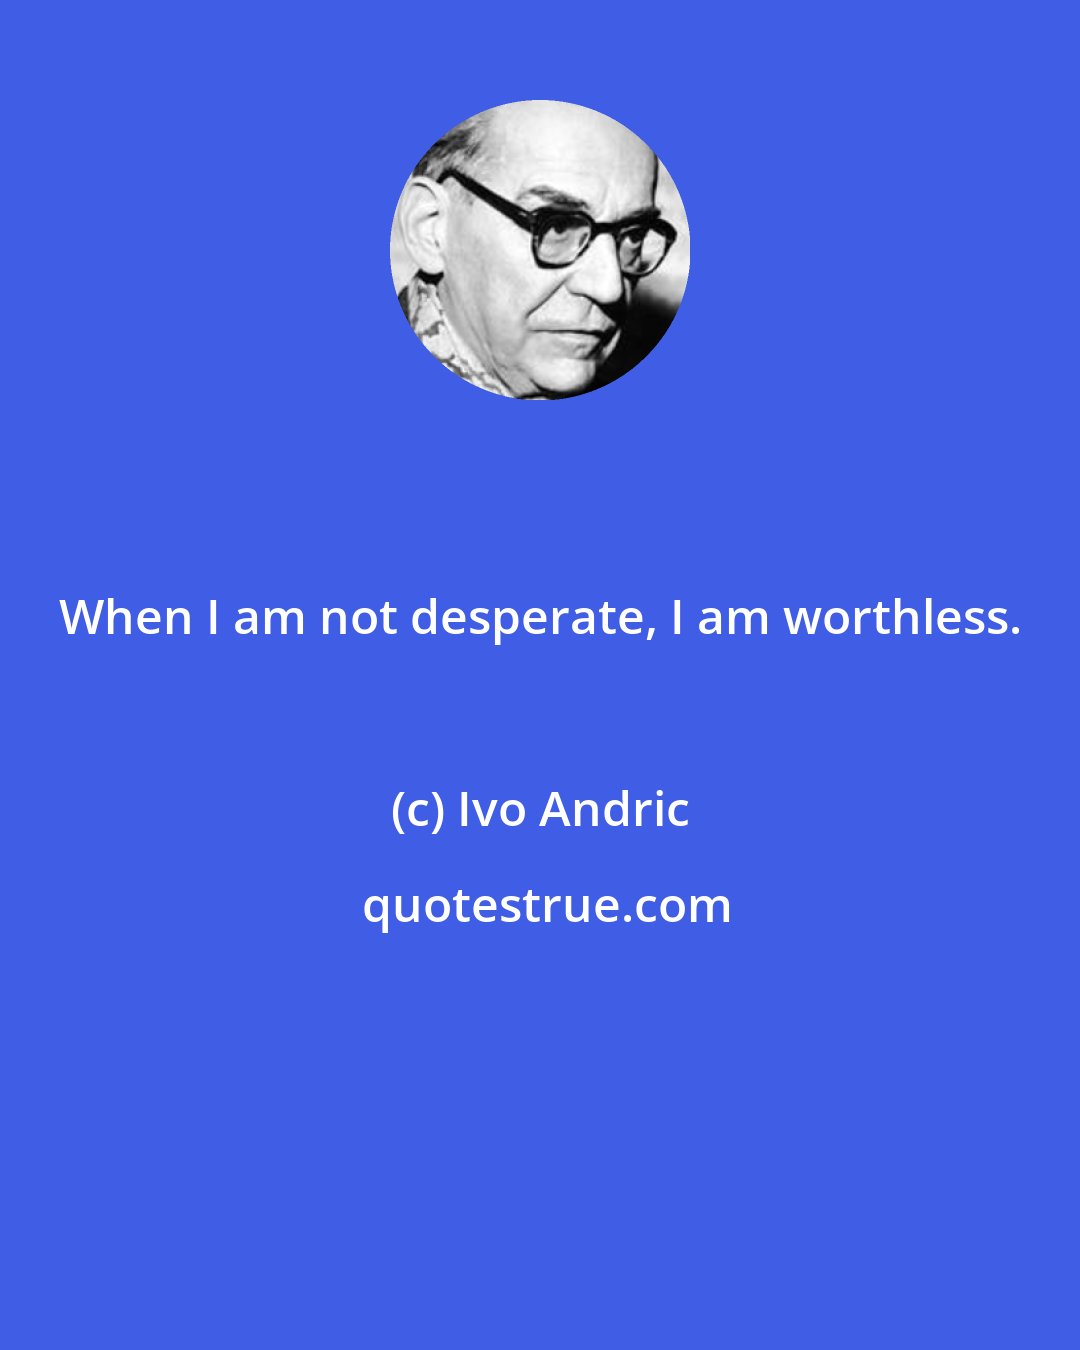 Ivo Andric: When I am not desperate, I am worthless.